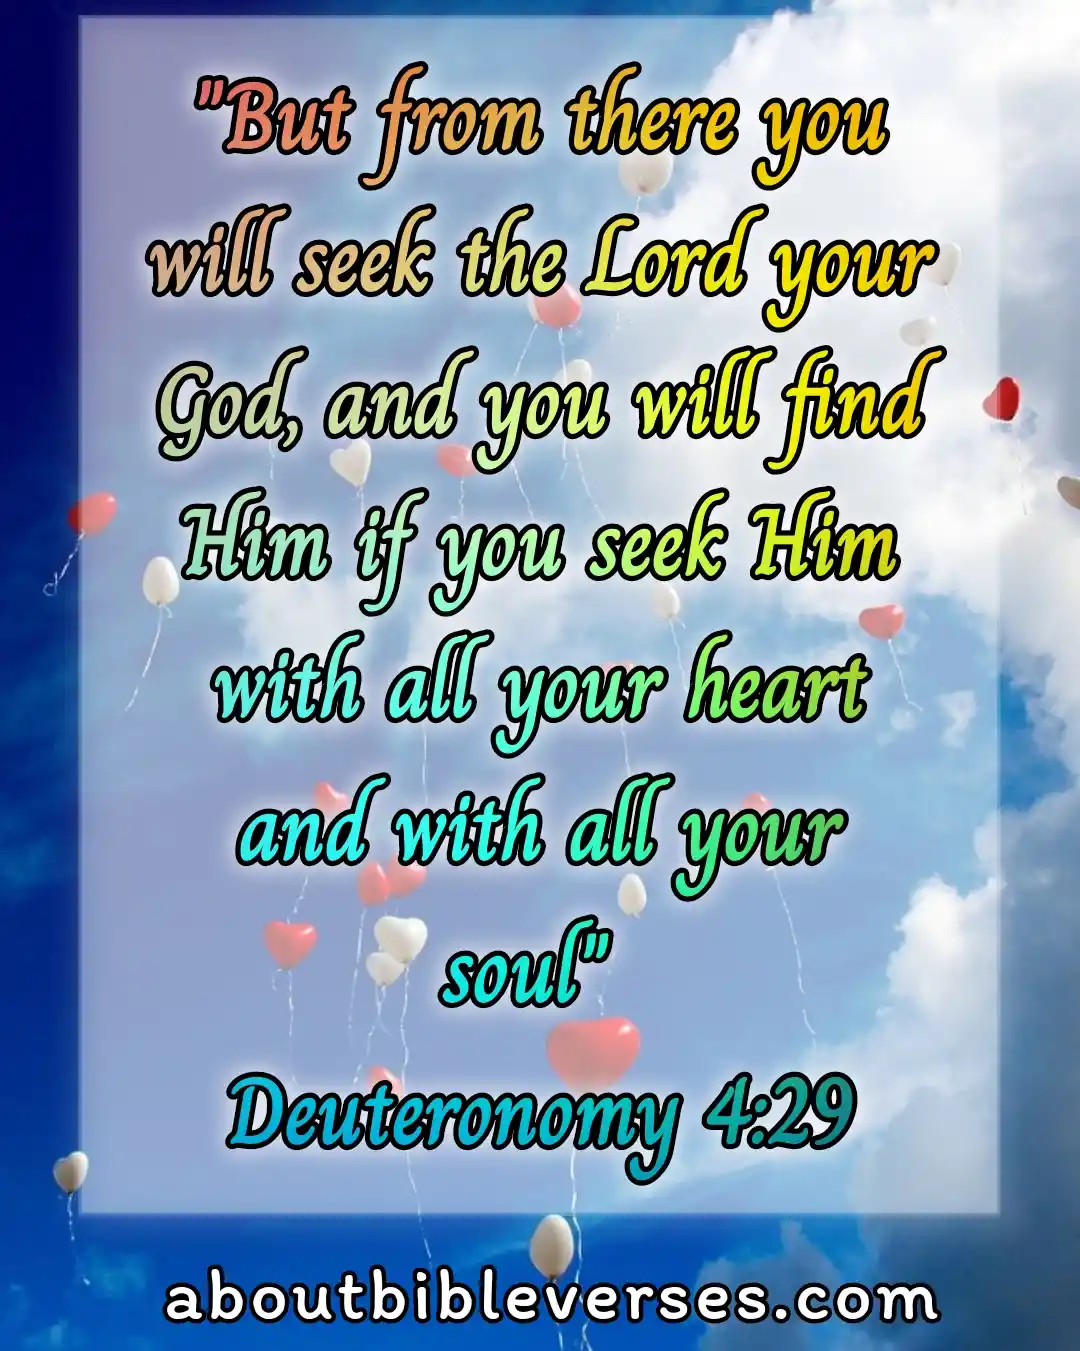 Bible Verses For Take Care Of Your Soul (Deuteronomy 4:29)